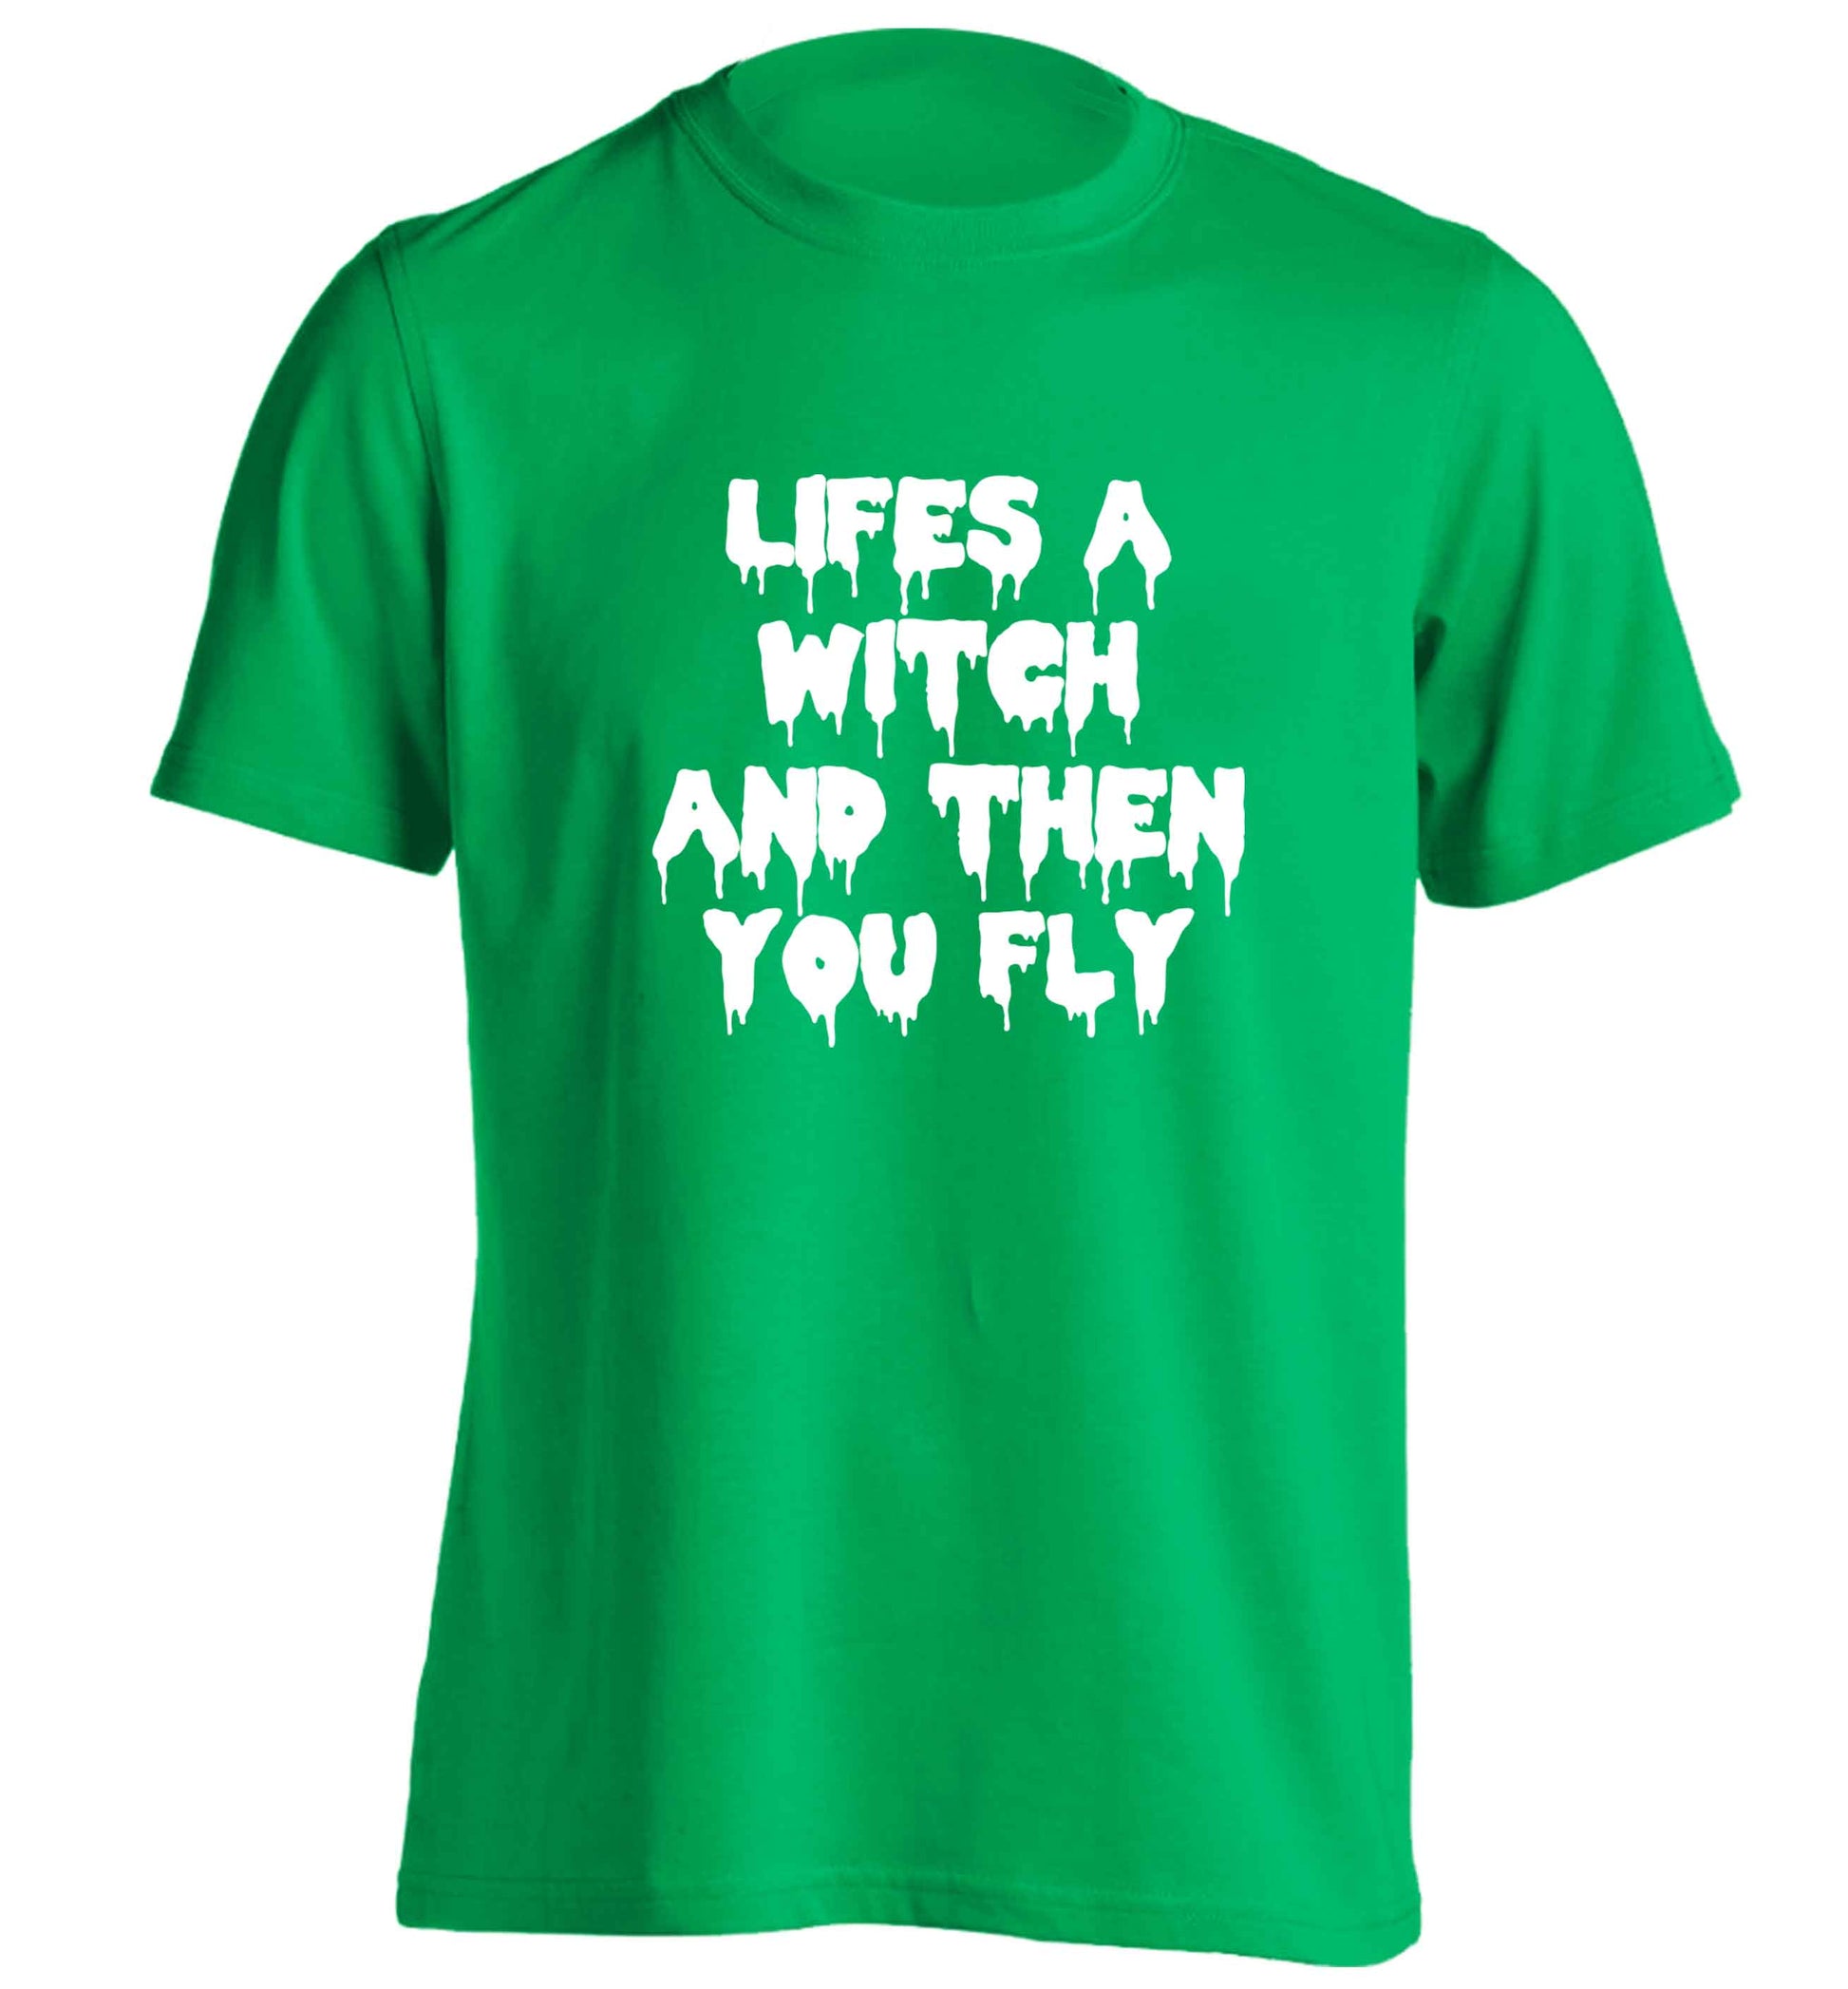 Life's a witch and then you fly adults unisex green Tshirt 2XL